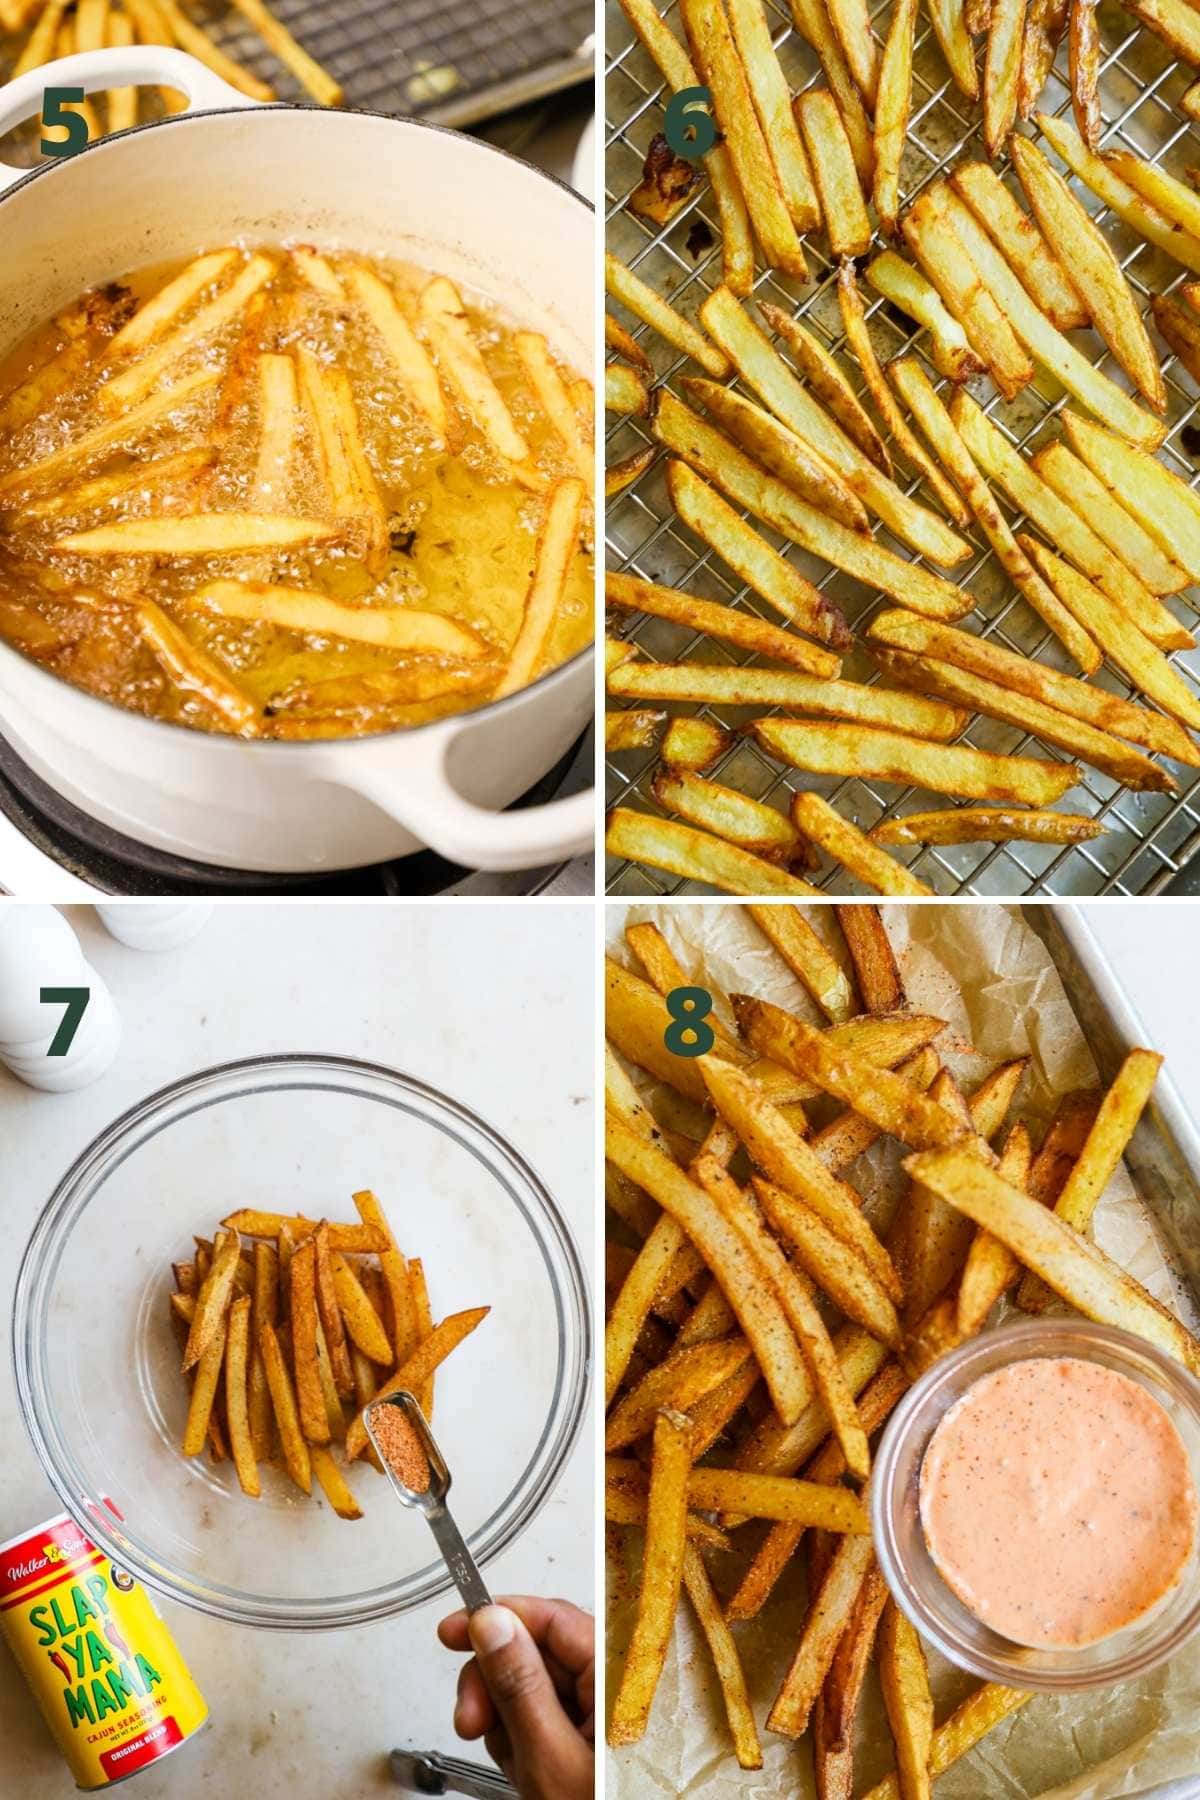 Steps to make fries and season with spicy cajun seasoning.